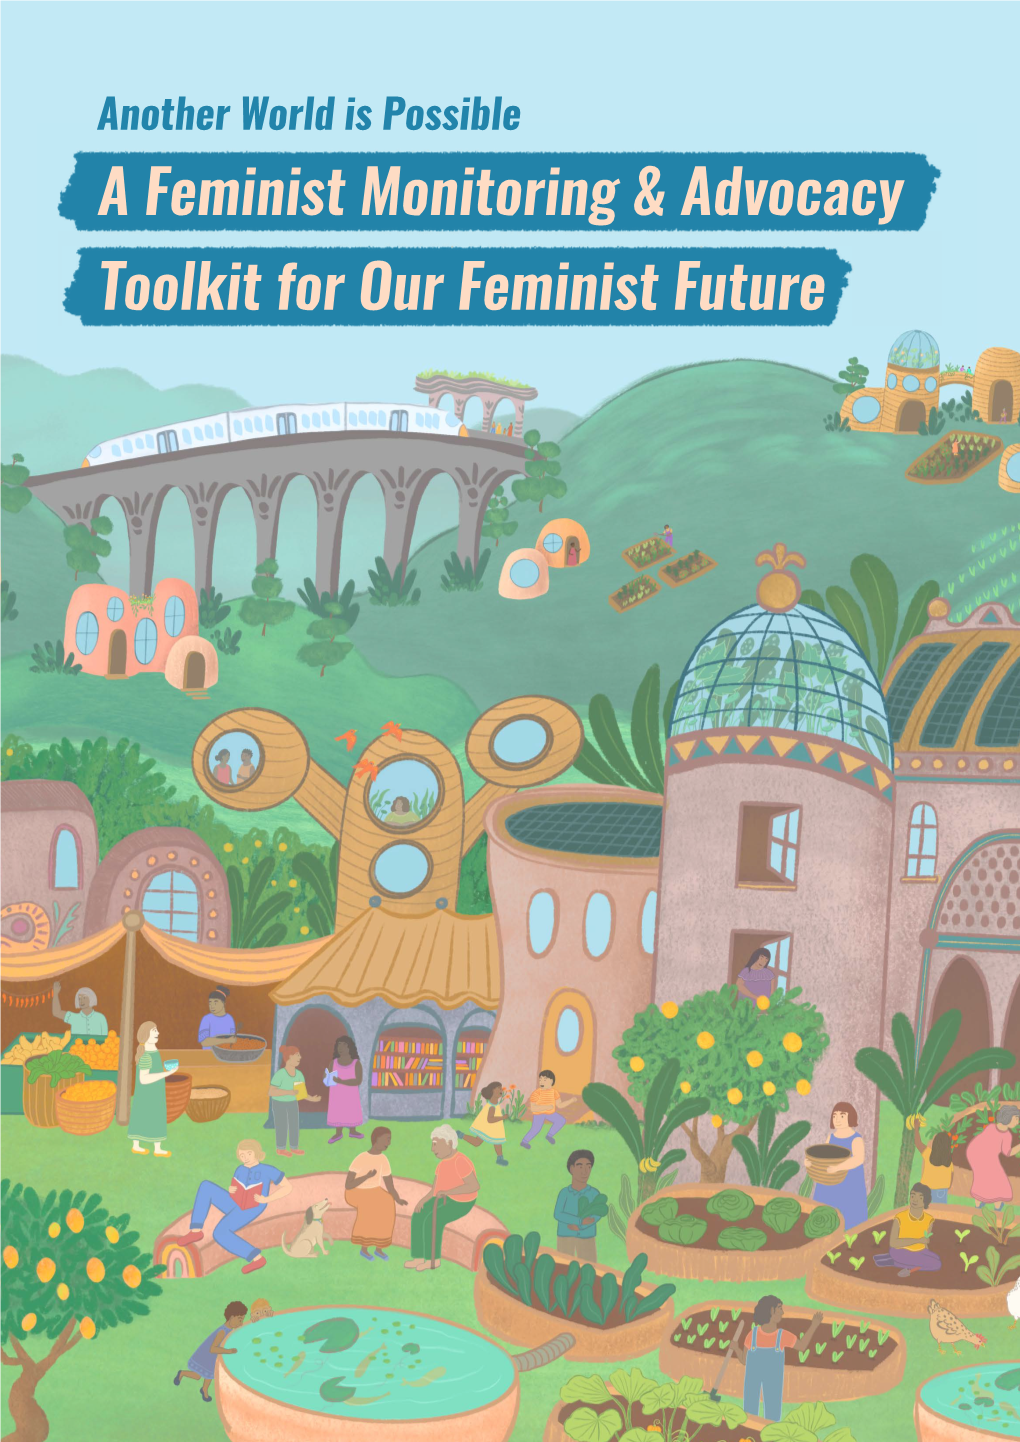 A Feminist Monitoring & Advocacy Toolkit for Our Feminist Future